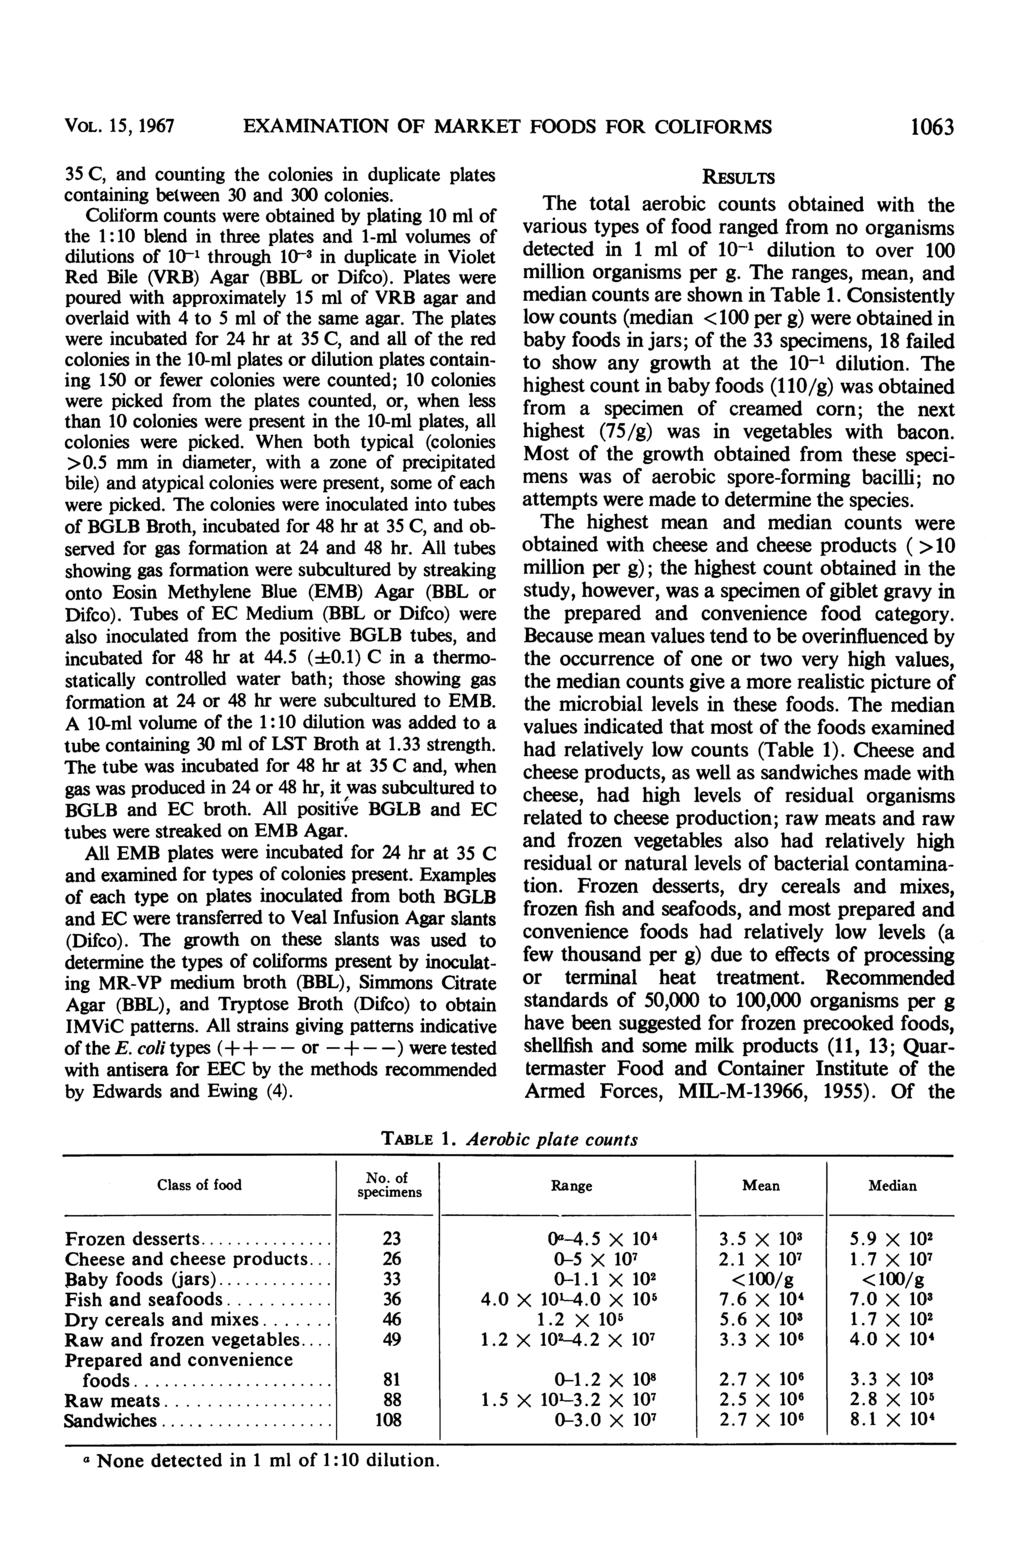 VOL. 15, 1967 EXAMINATION OF MARKET FOODS FOR COLIFORMS 1063 35 C, and counting the colonies in duplicate plates containing between 30 and 300 colonies.